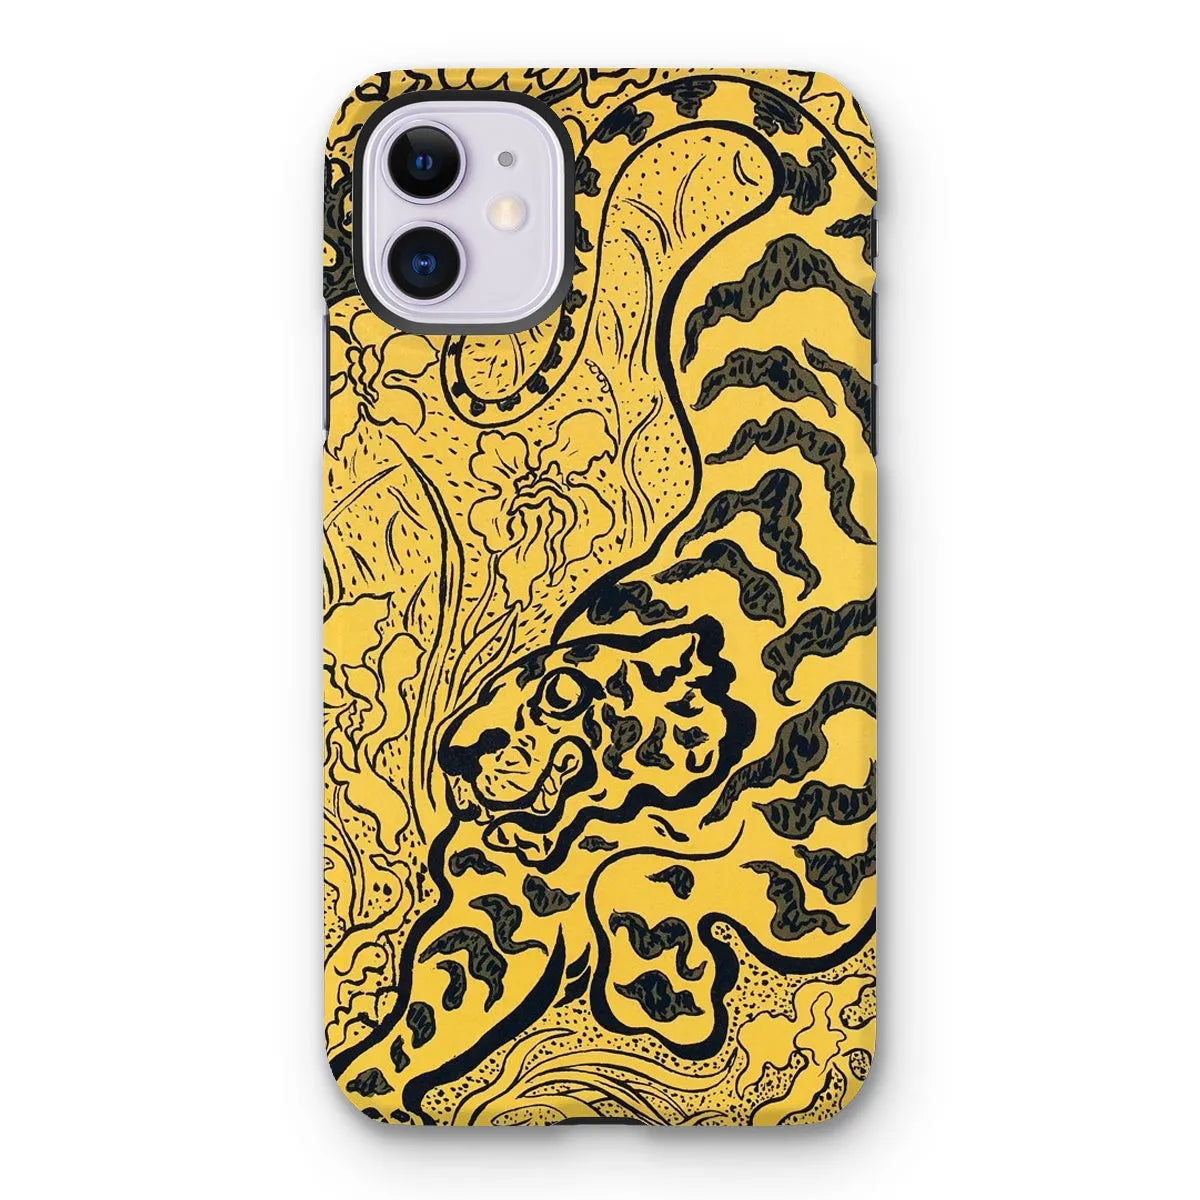 Tiger In The Jungle - Graphic Art Phone Case - Paul Ranson - Iphone 11 / Matte - Mobile Phone Cases - Aesthetic Art